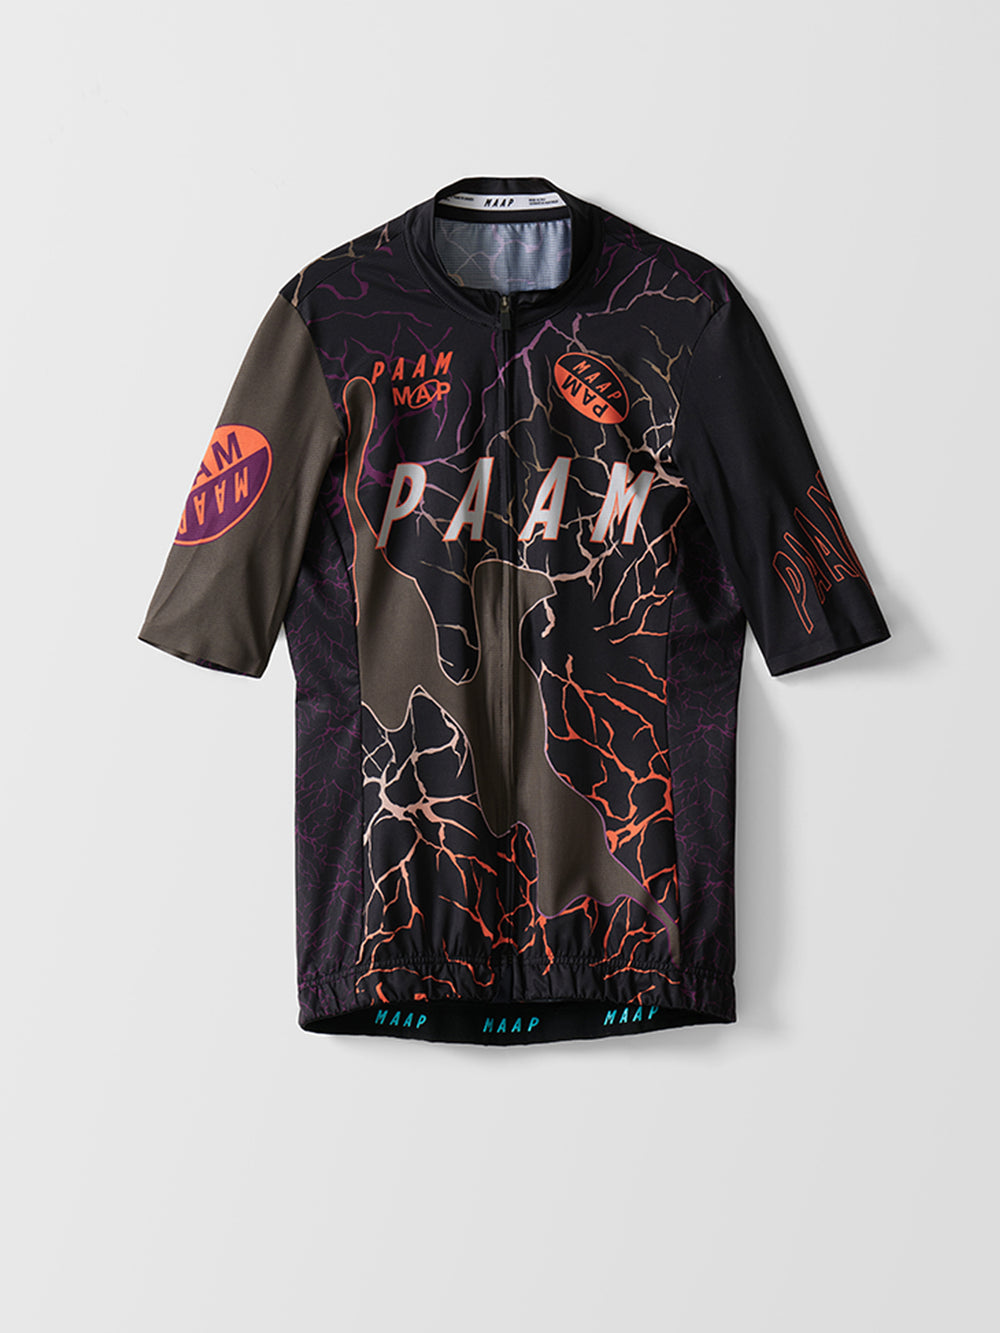 Product Image for Women's MAAP X PAM Wild Team Jersey